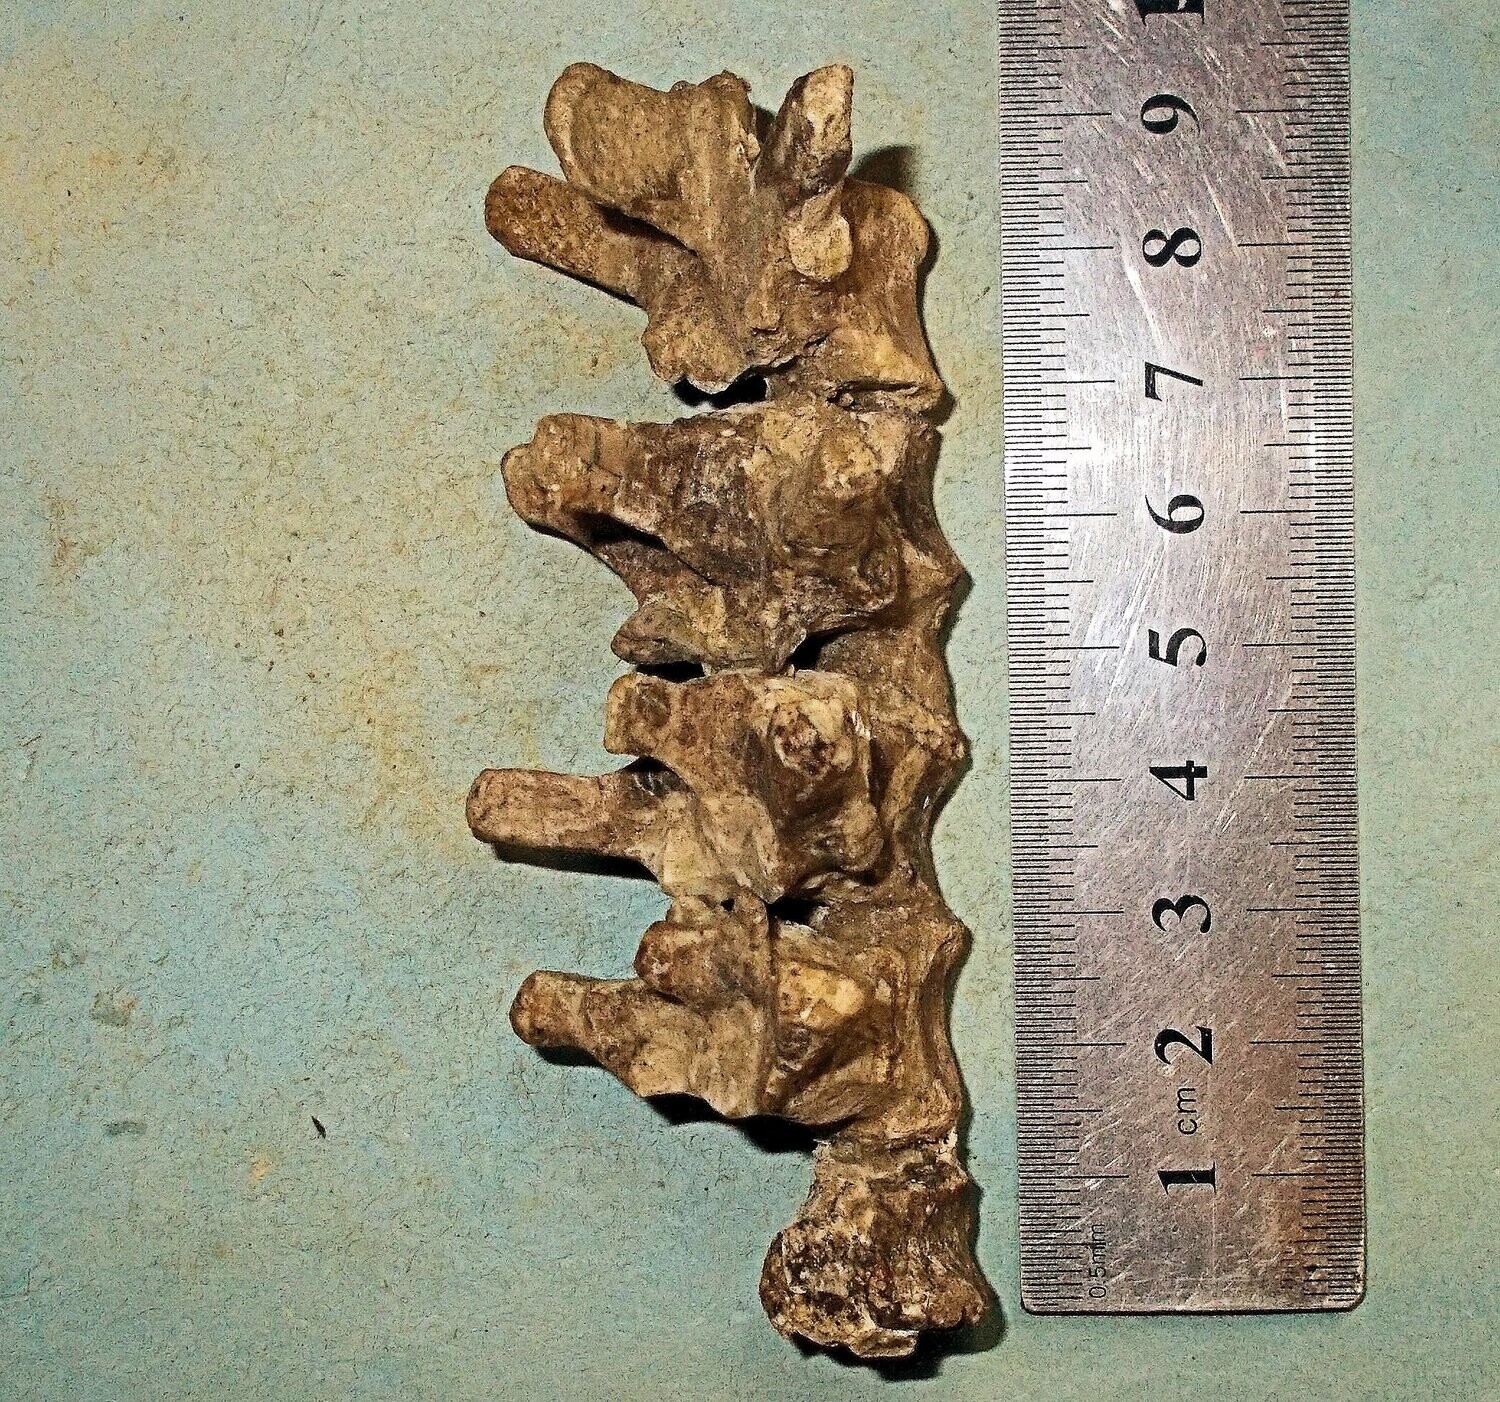 4 X excellent articulated vertebrae of Psittacosaurus mazongshensis  Yu 1997, from the Lower Xinminbao Formation of Ganzu Province, China.